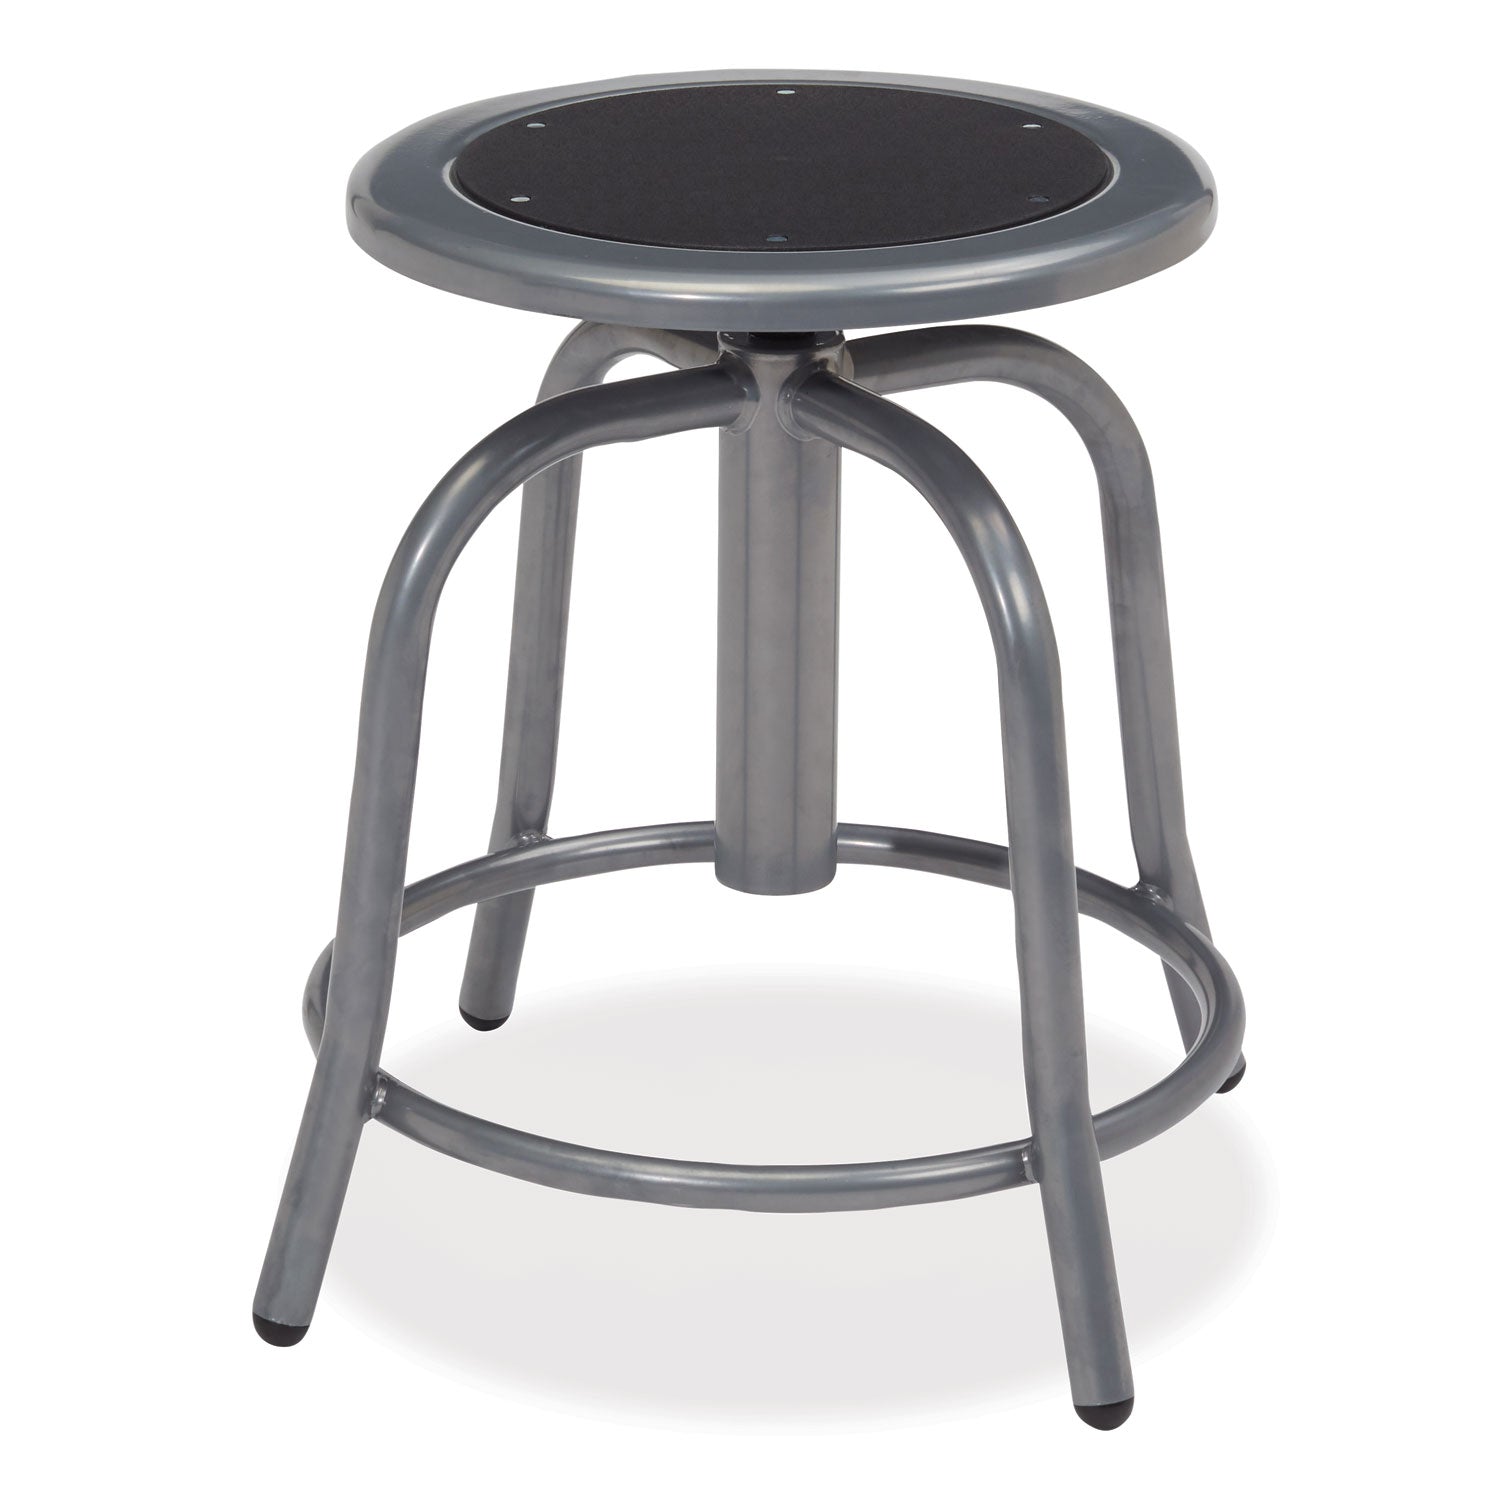 6800-series-height-adj-metal-seat-swivel-stool-supports-300-lb-18-24-seat-ht-black-seat-gray-baseships-in-1-3-bus-days_nps681002 - 1